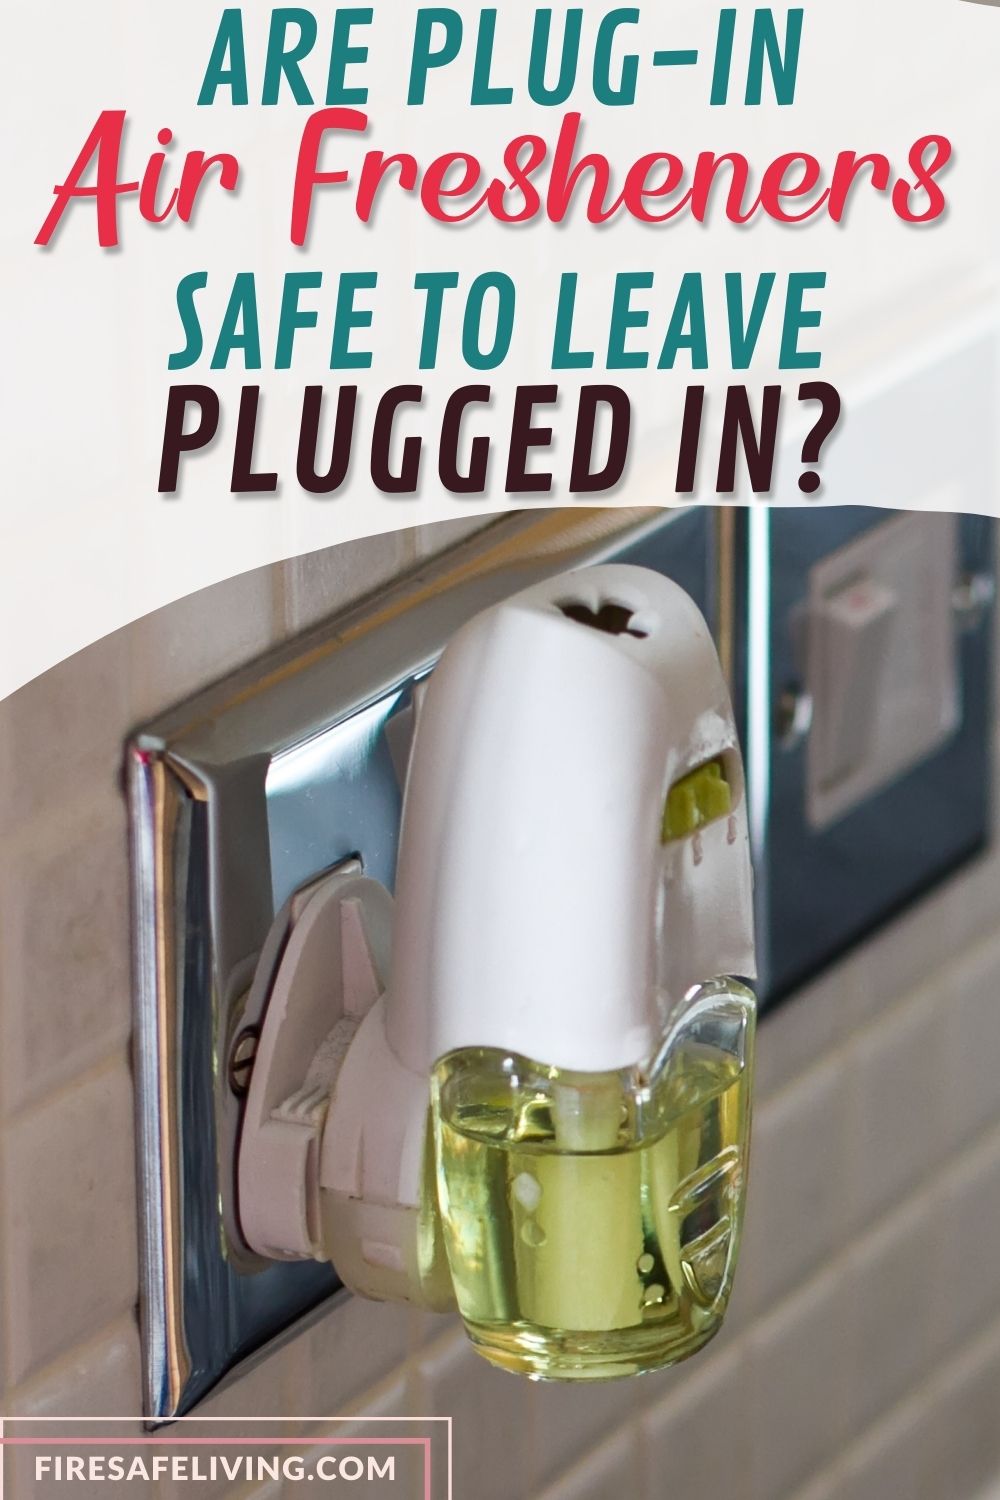 Plugged in air freshener with text overlay that reads Are Plug-in Air Fresheners Safe to Leave Plugged In